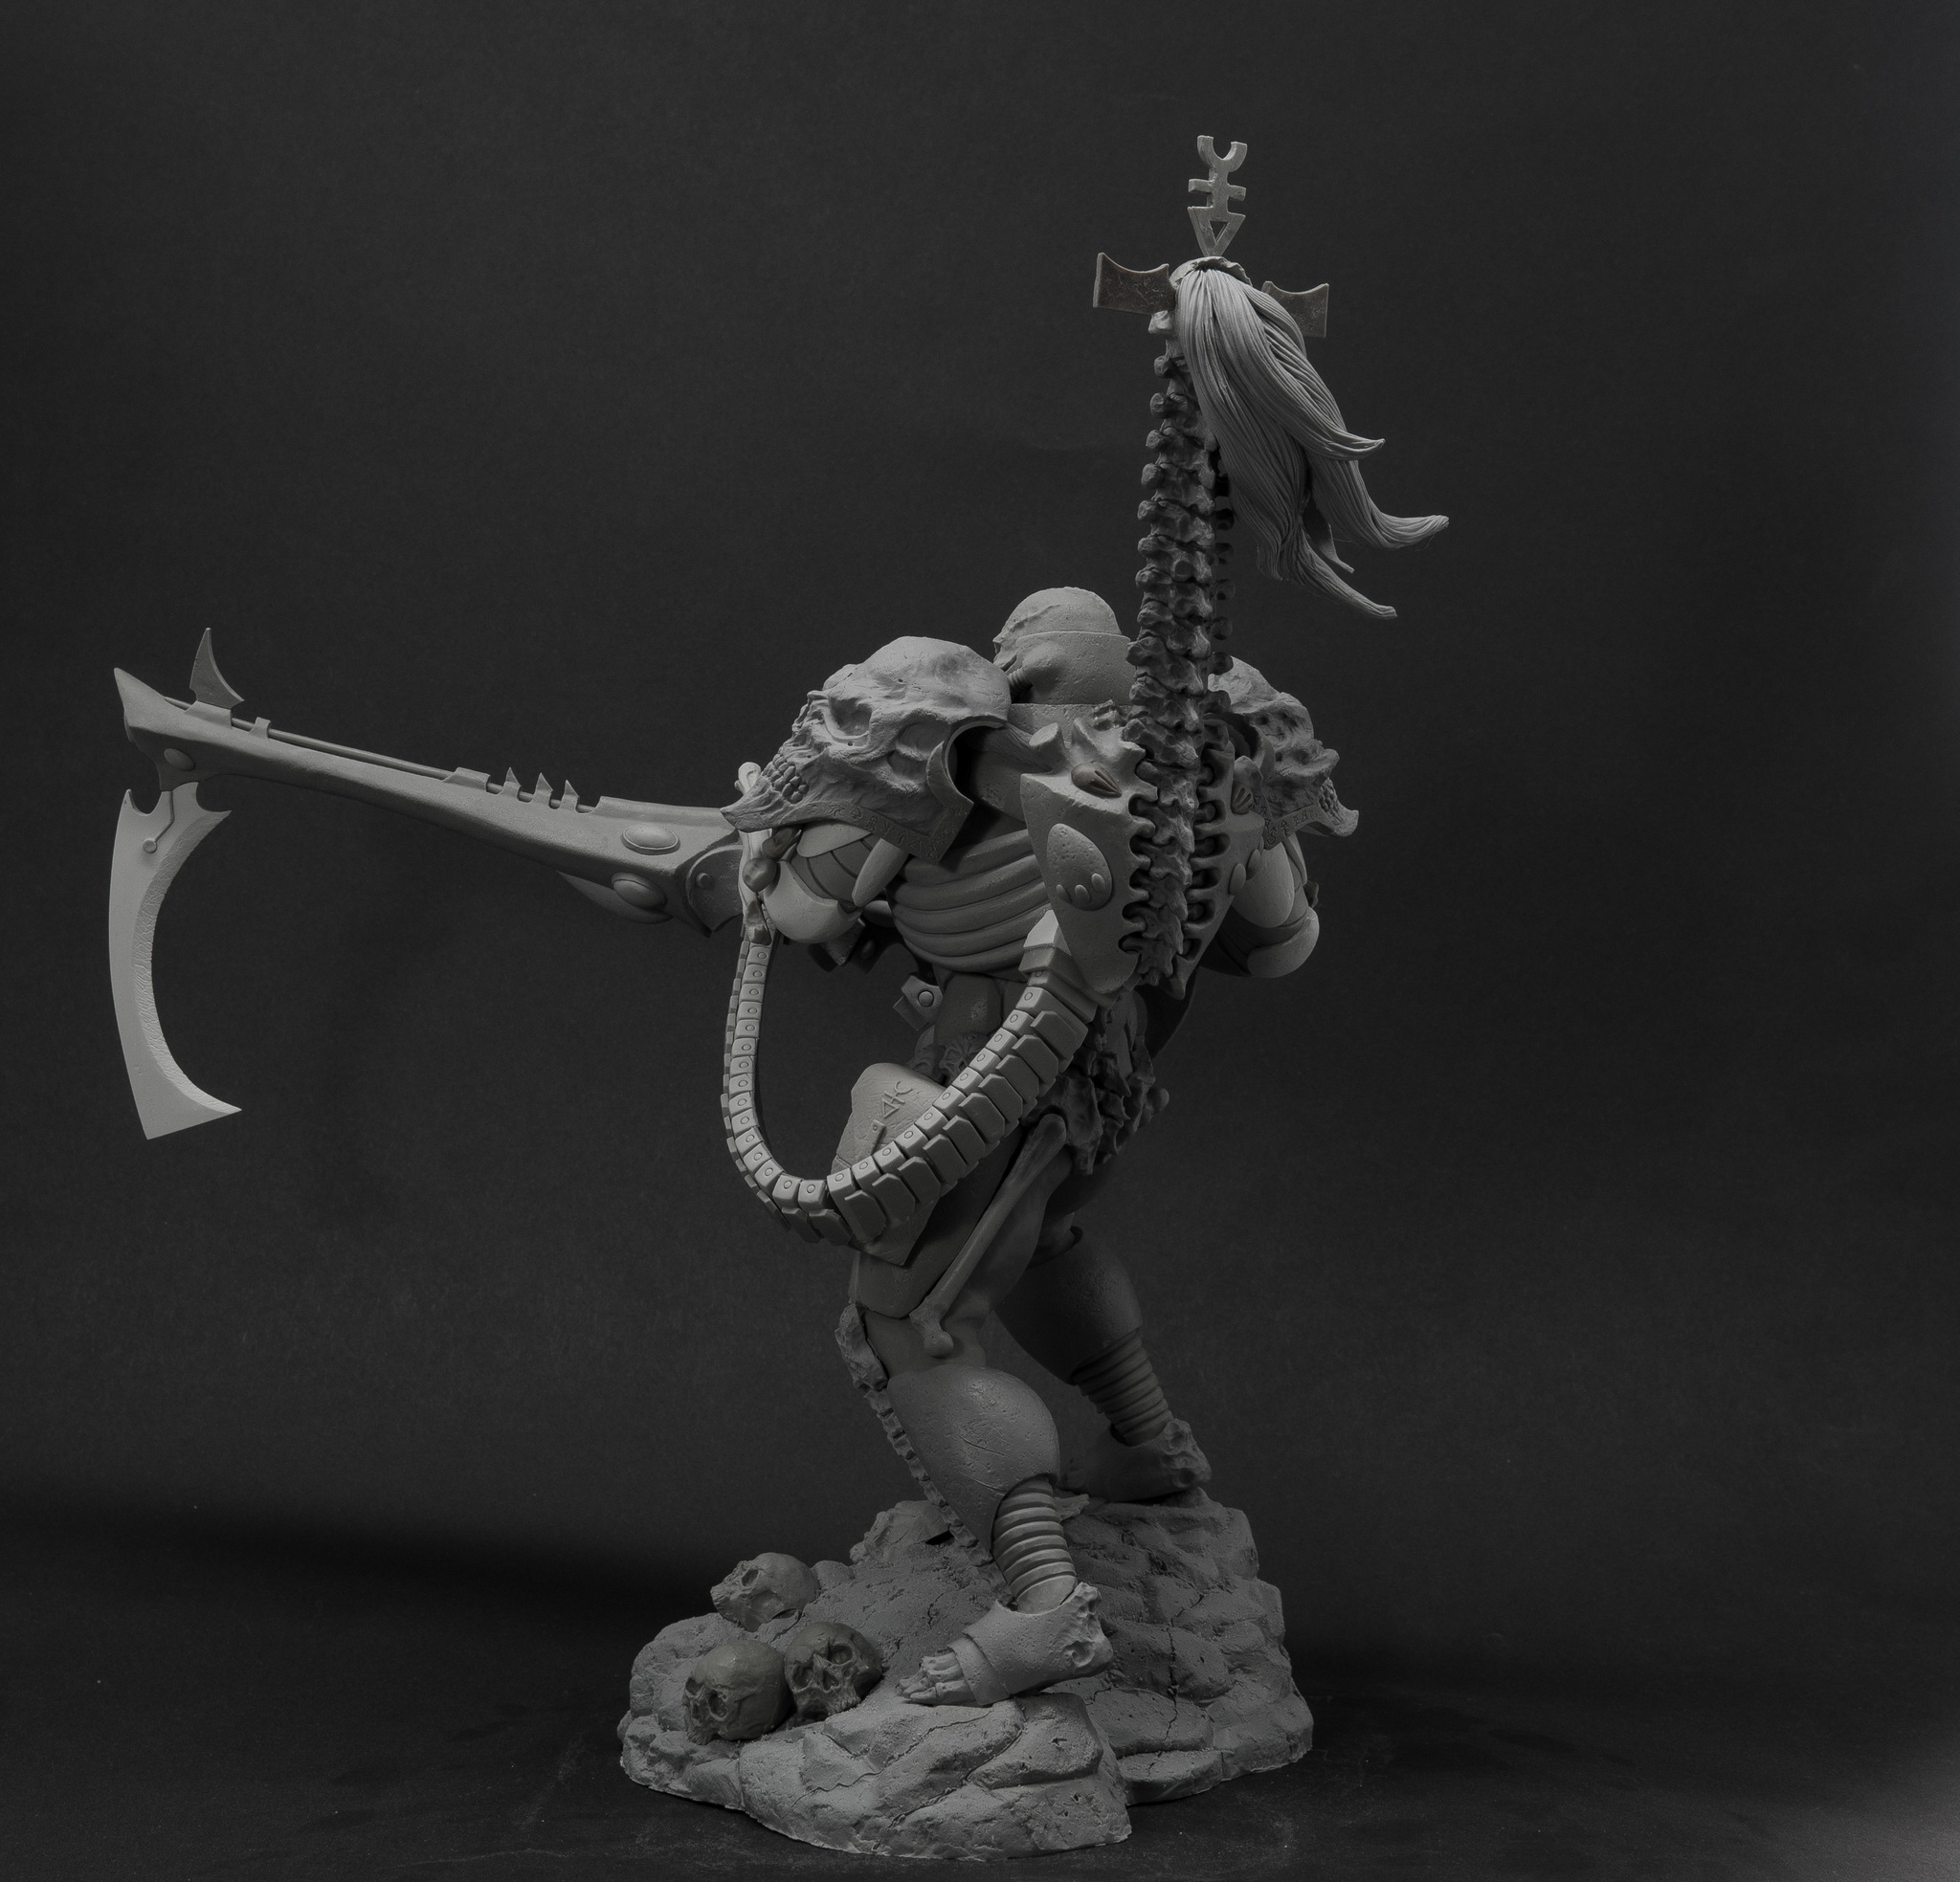 Maugan Ra. - My, Warhammer 40k, Warhammer, Polymer clay, Sculpture, With your own hands, Models, Hobby, Longpost